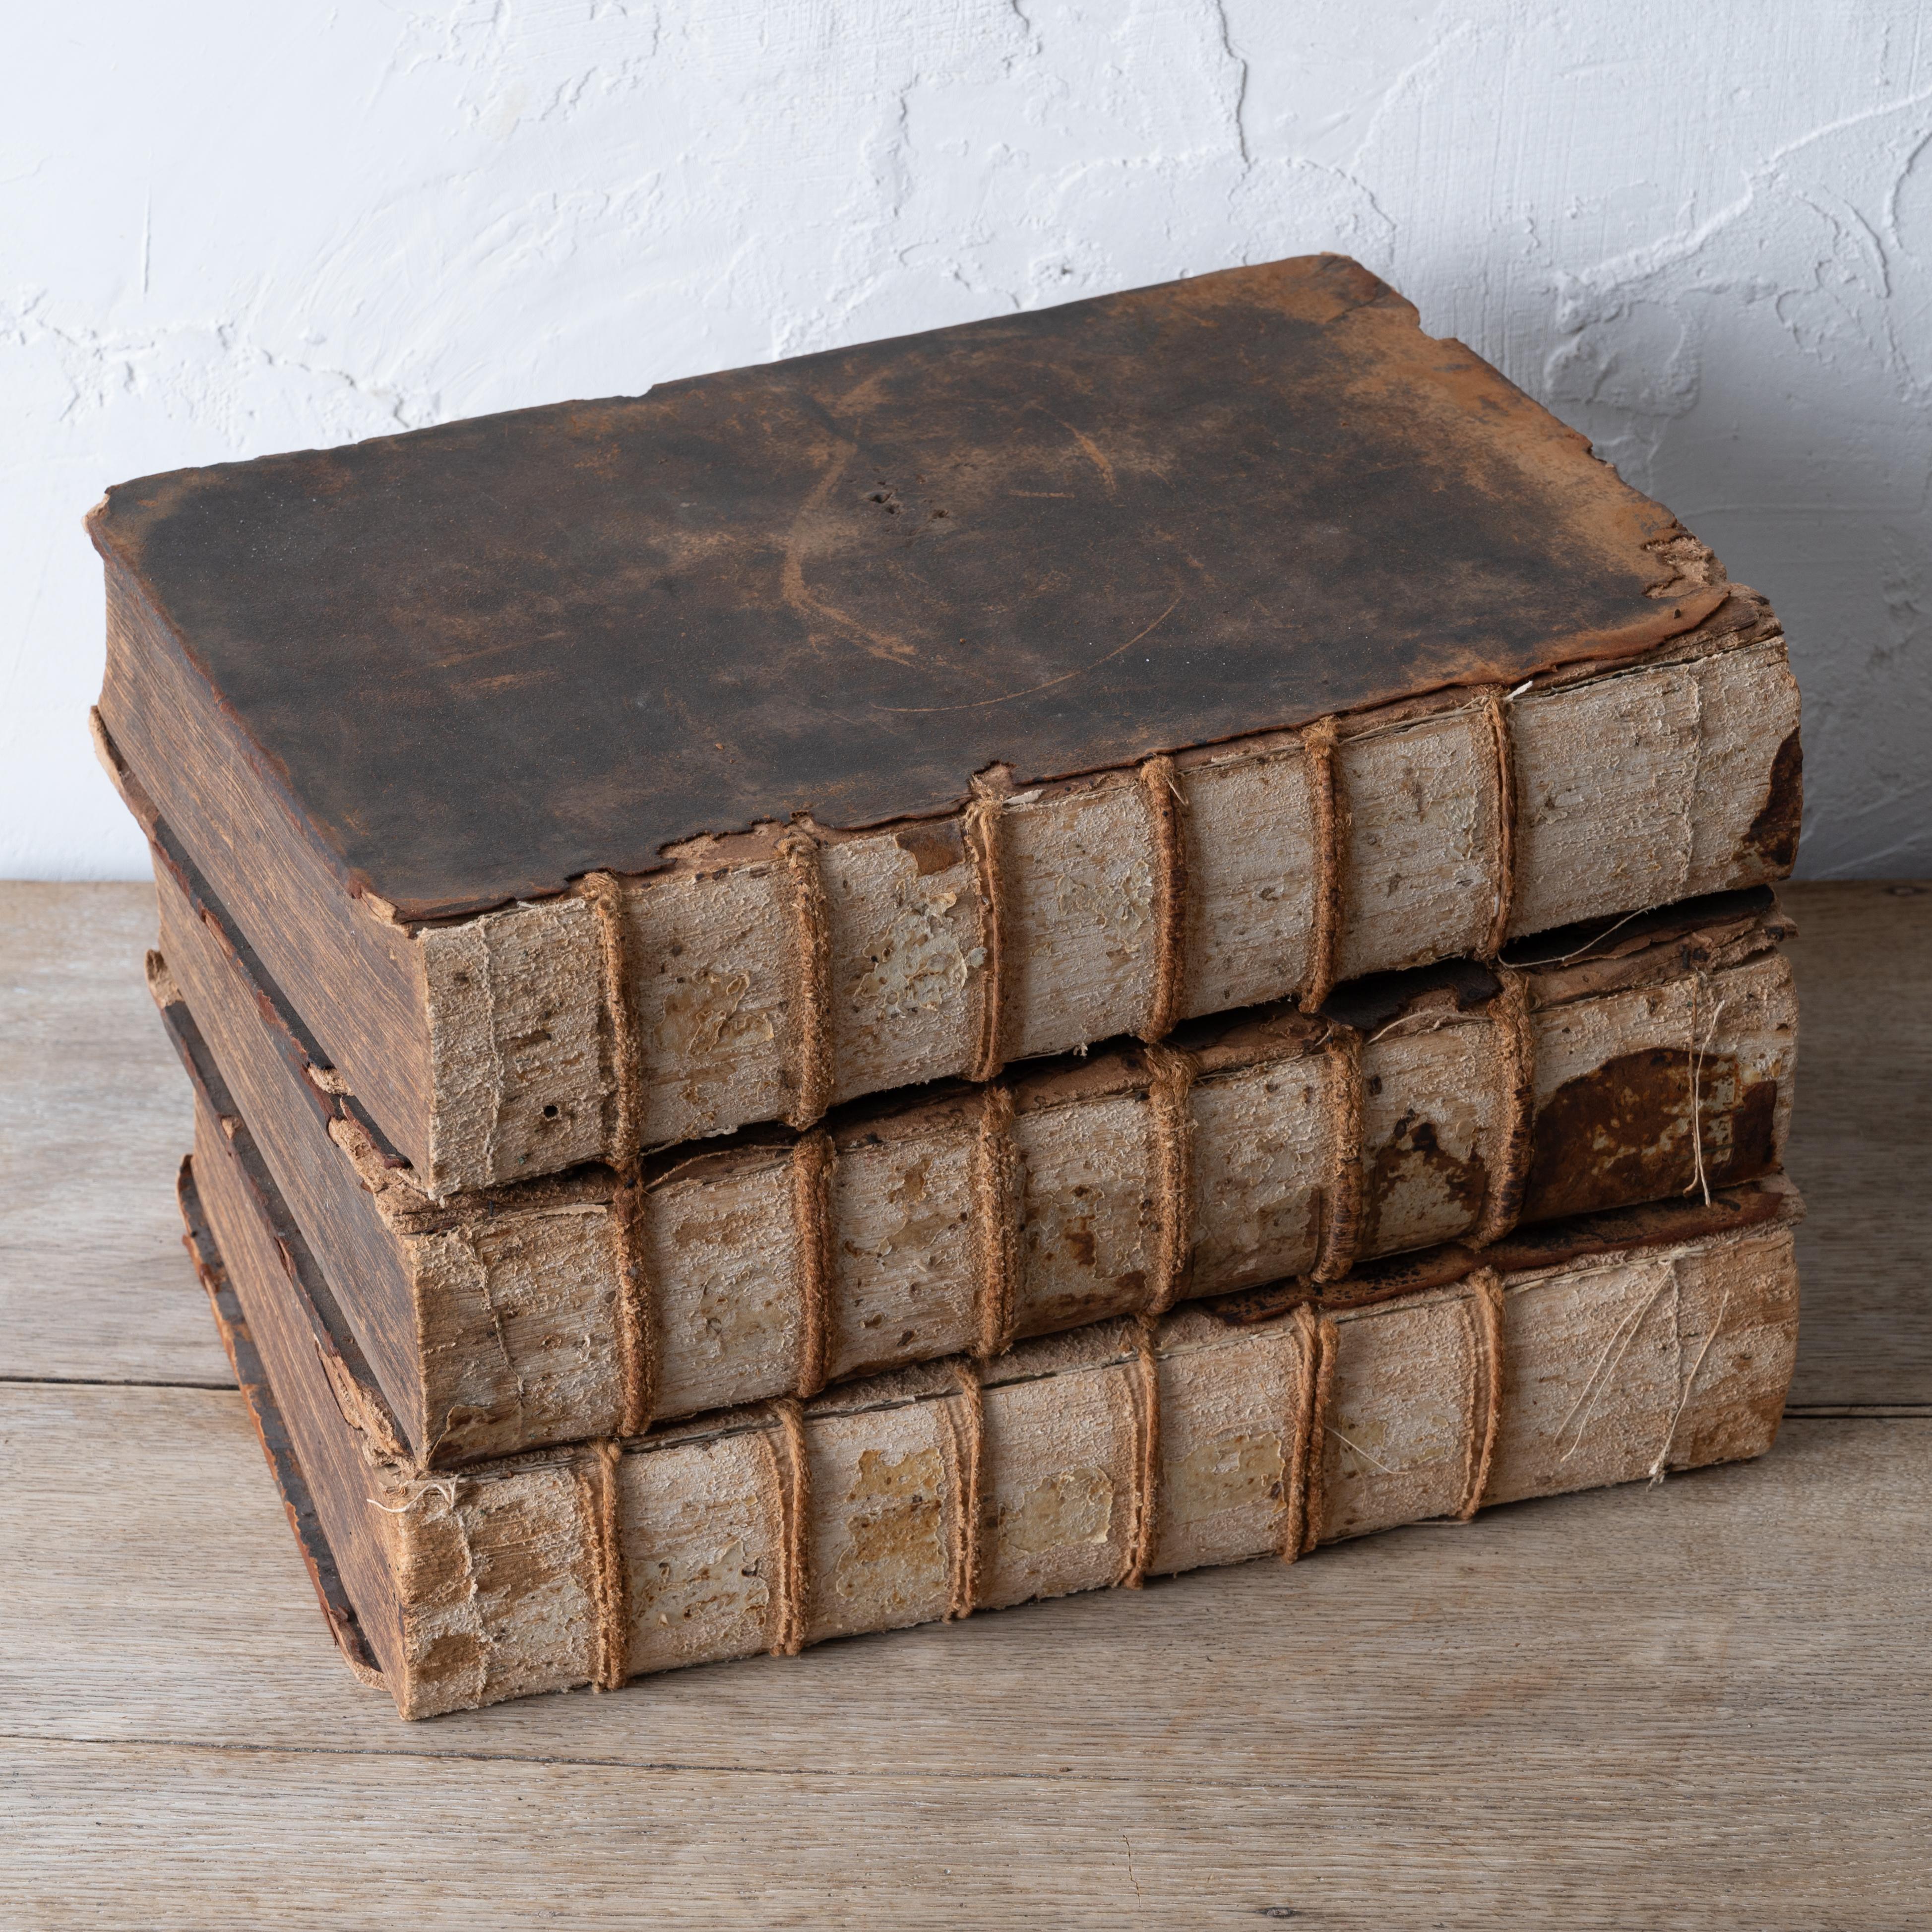 Pierre Bayle's Dictionnaire Historique et Critique published in Rotterdam 1715, third edition.

Measured as stacked: 15 ¼ inches wide by 10 ¾ inches deep by 9 ½ inches tall; each book just over 3 inches wide